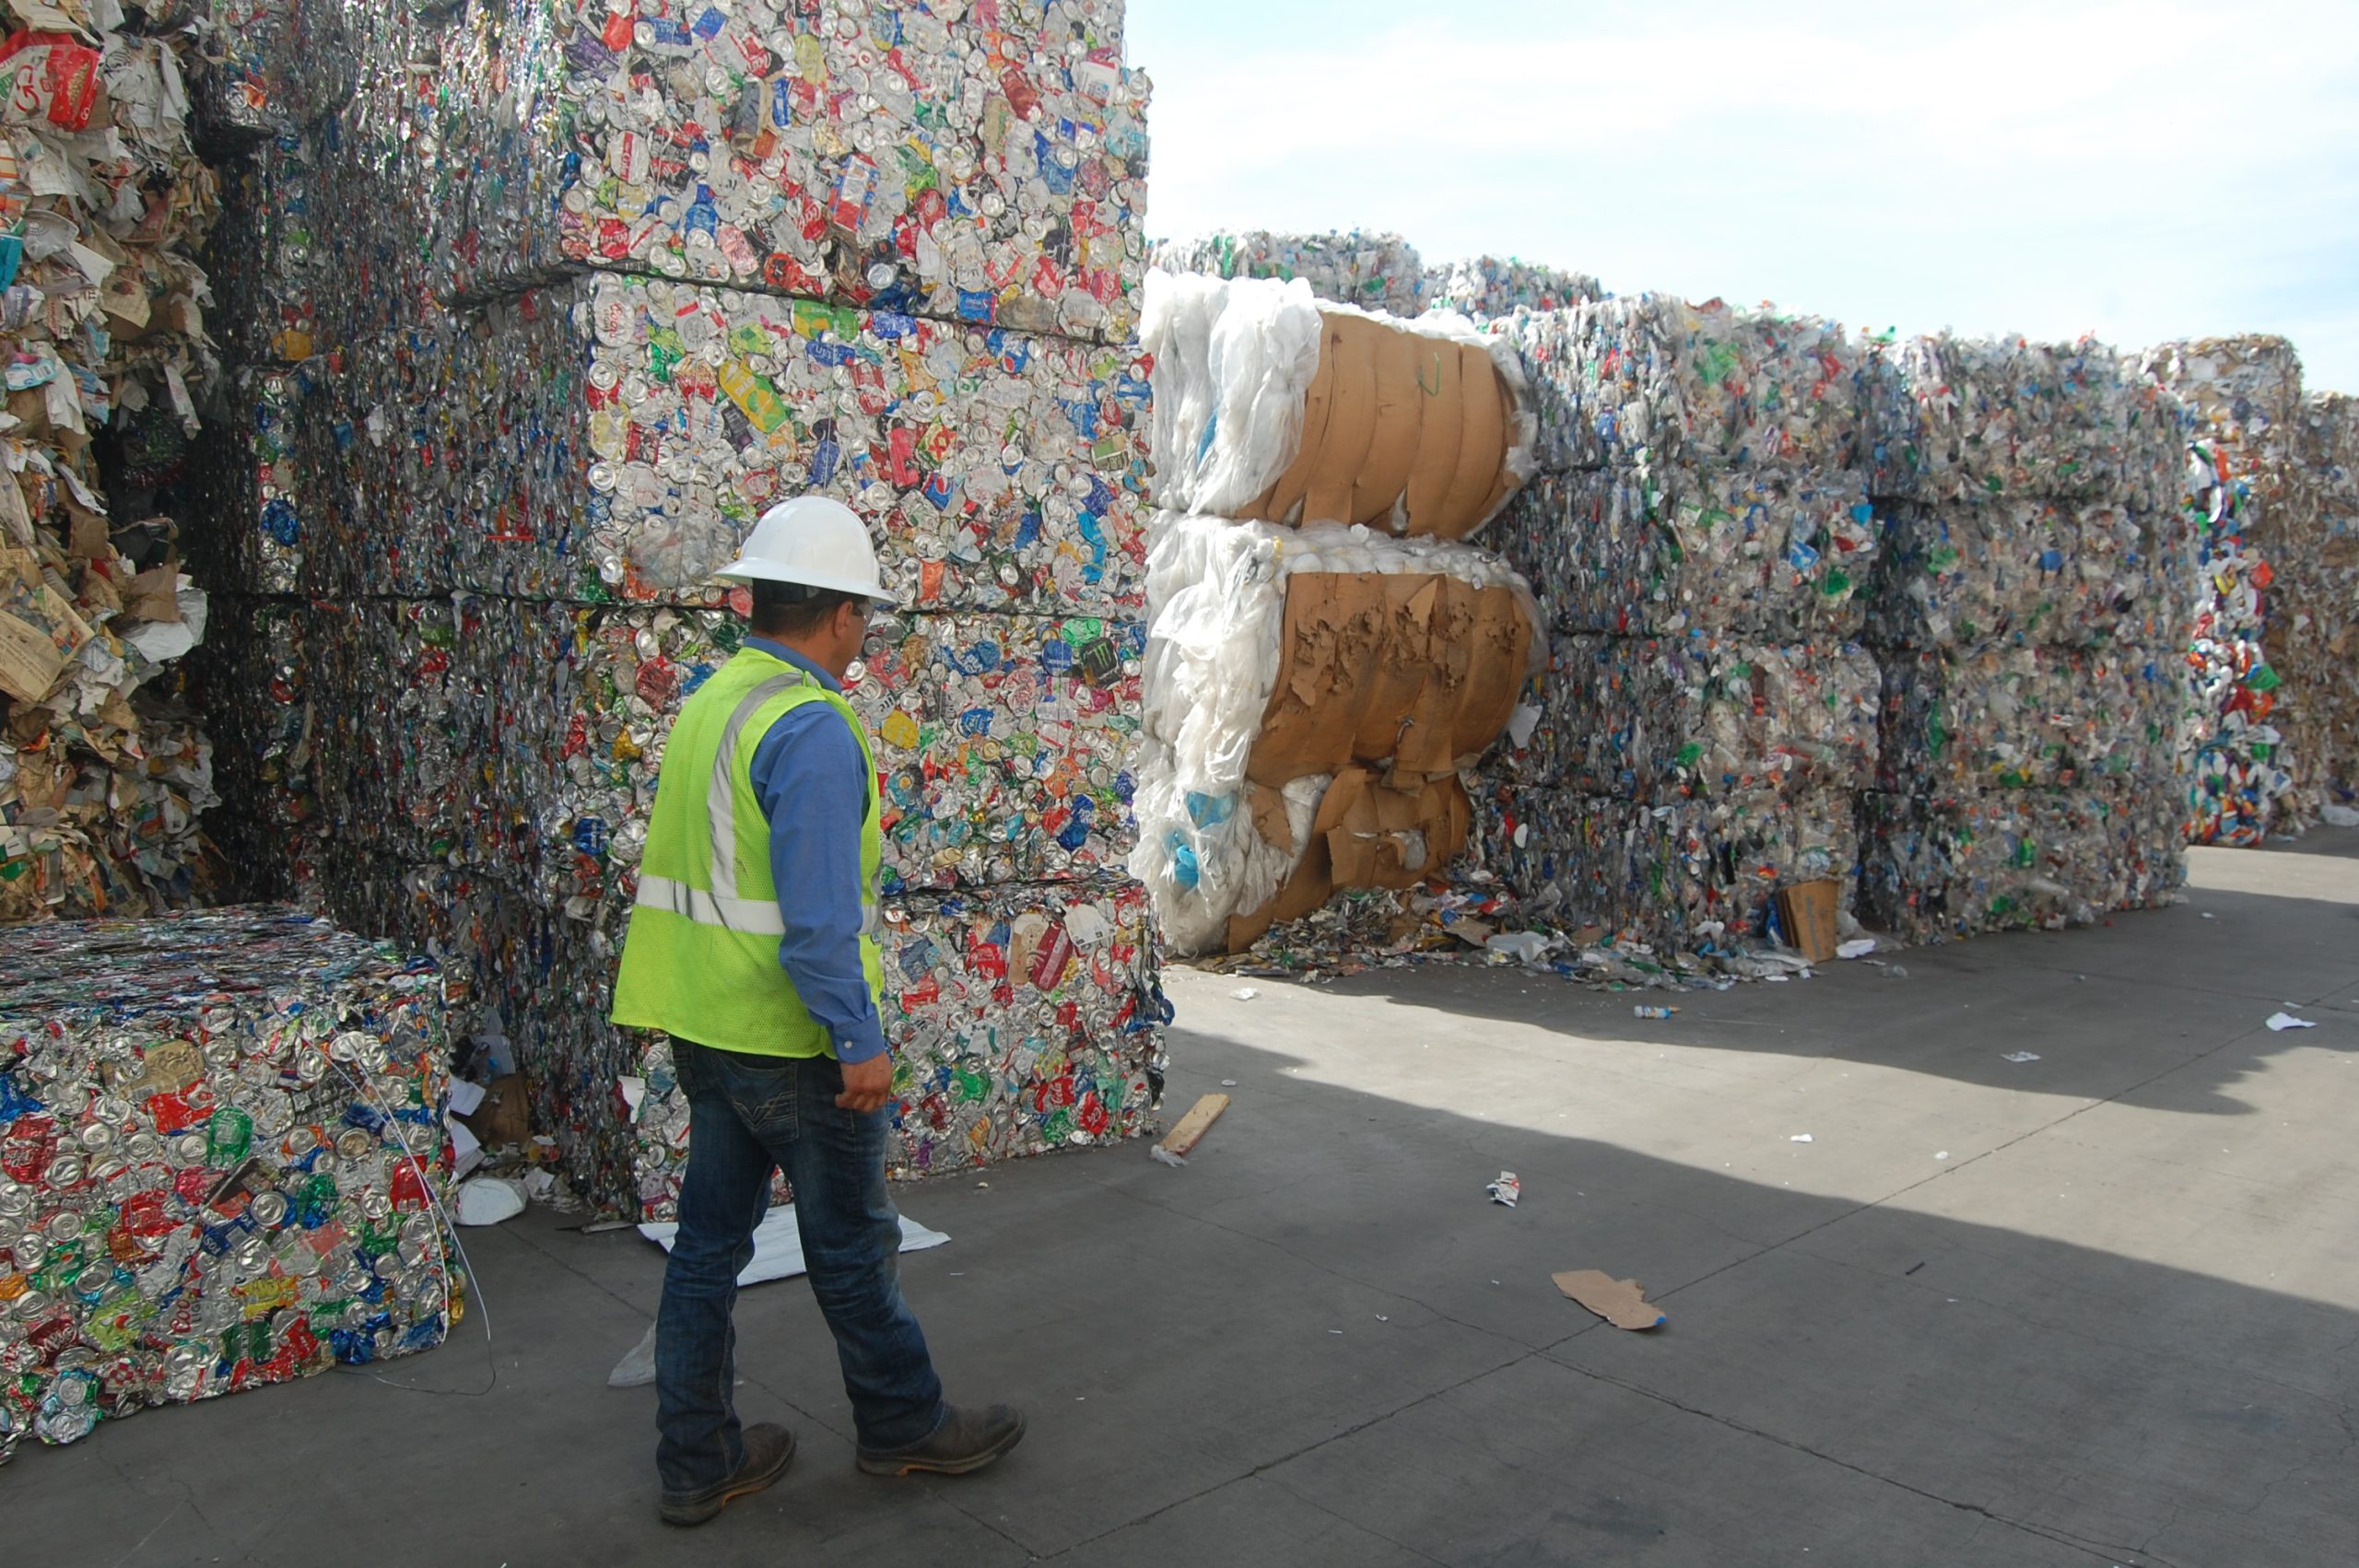 Trash or Treasure? Adapting to recycling’s new normal